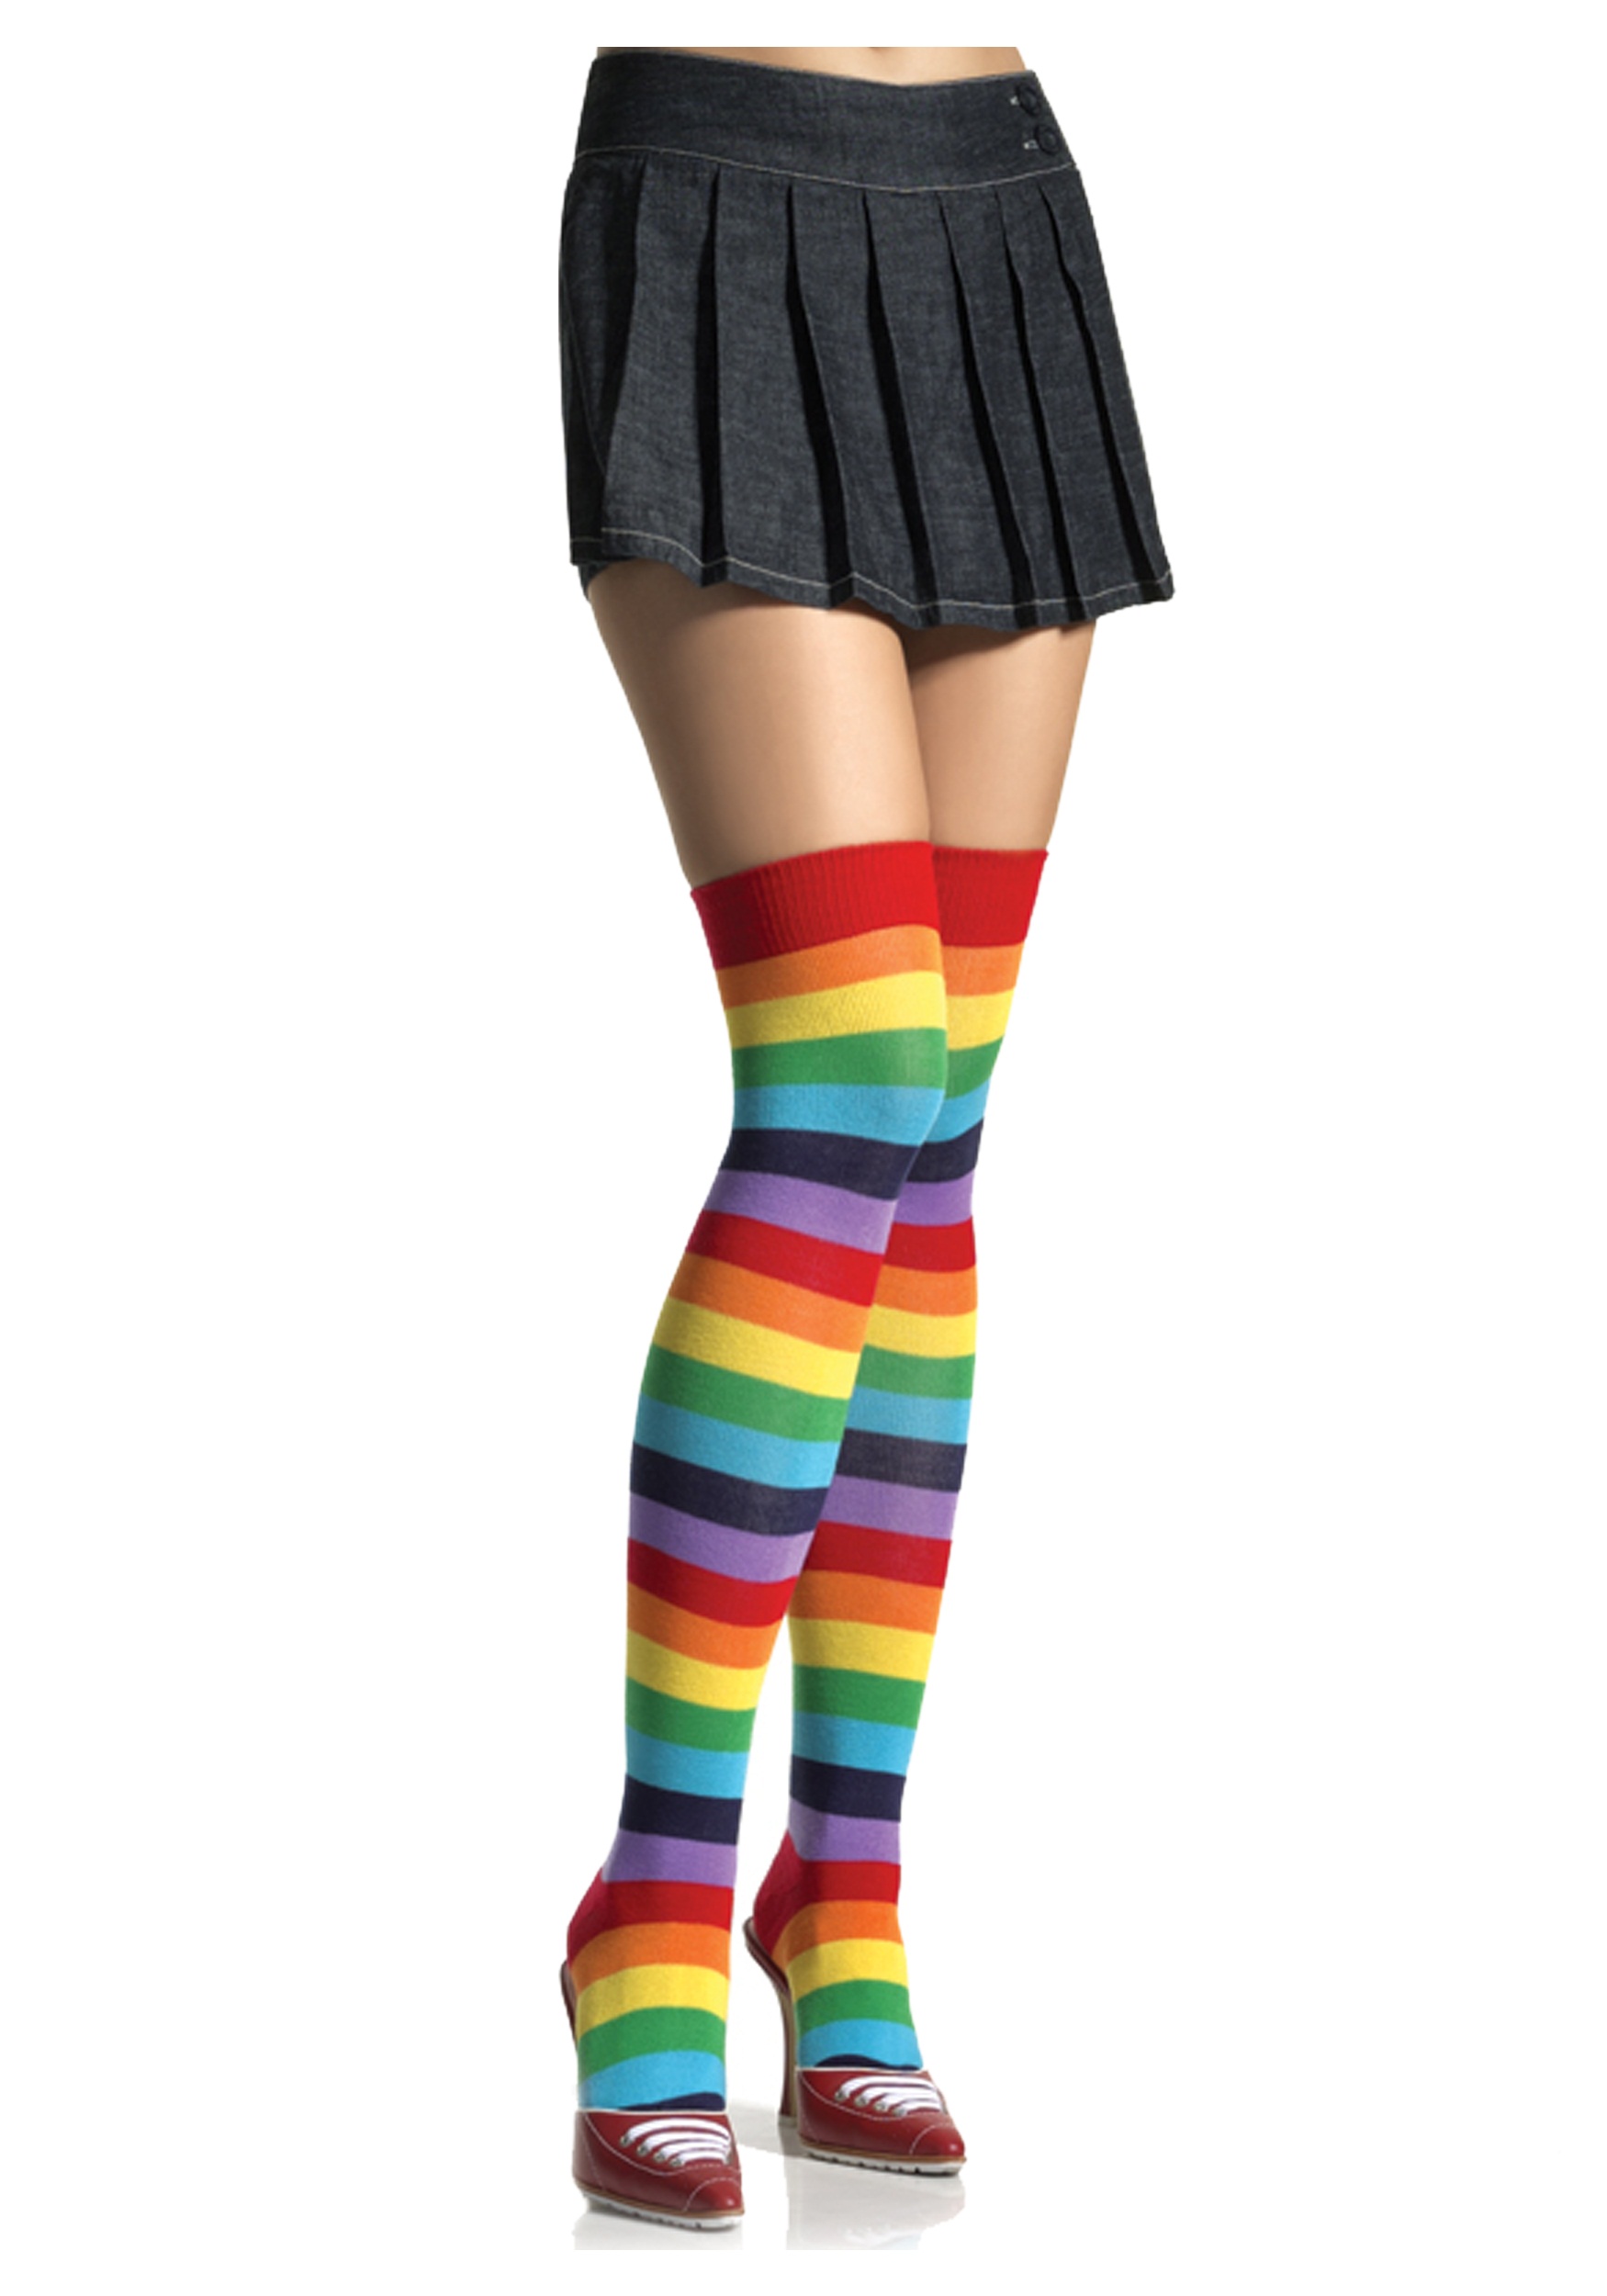 Details about   New Leg Avenue 6334 Rainbow Thigh High Stockings